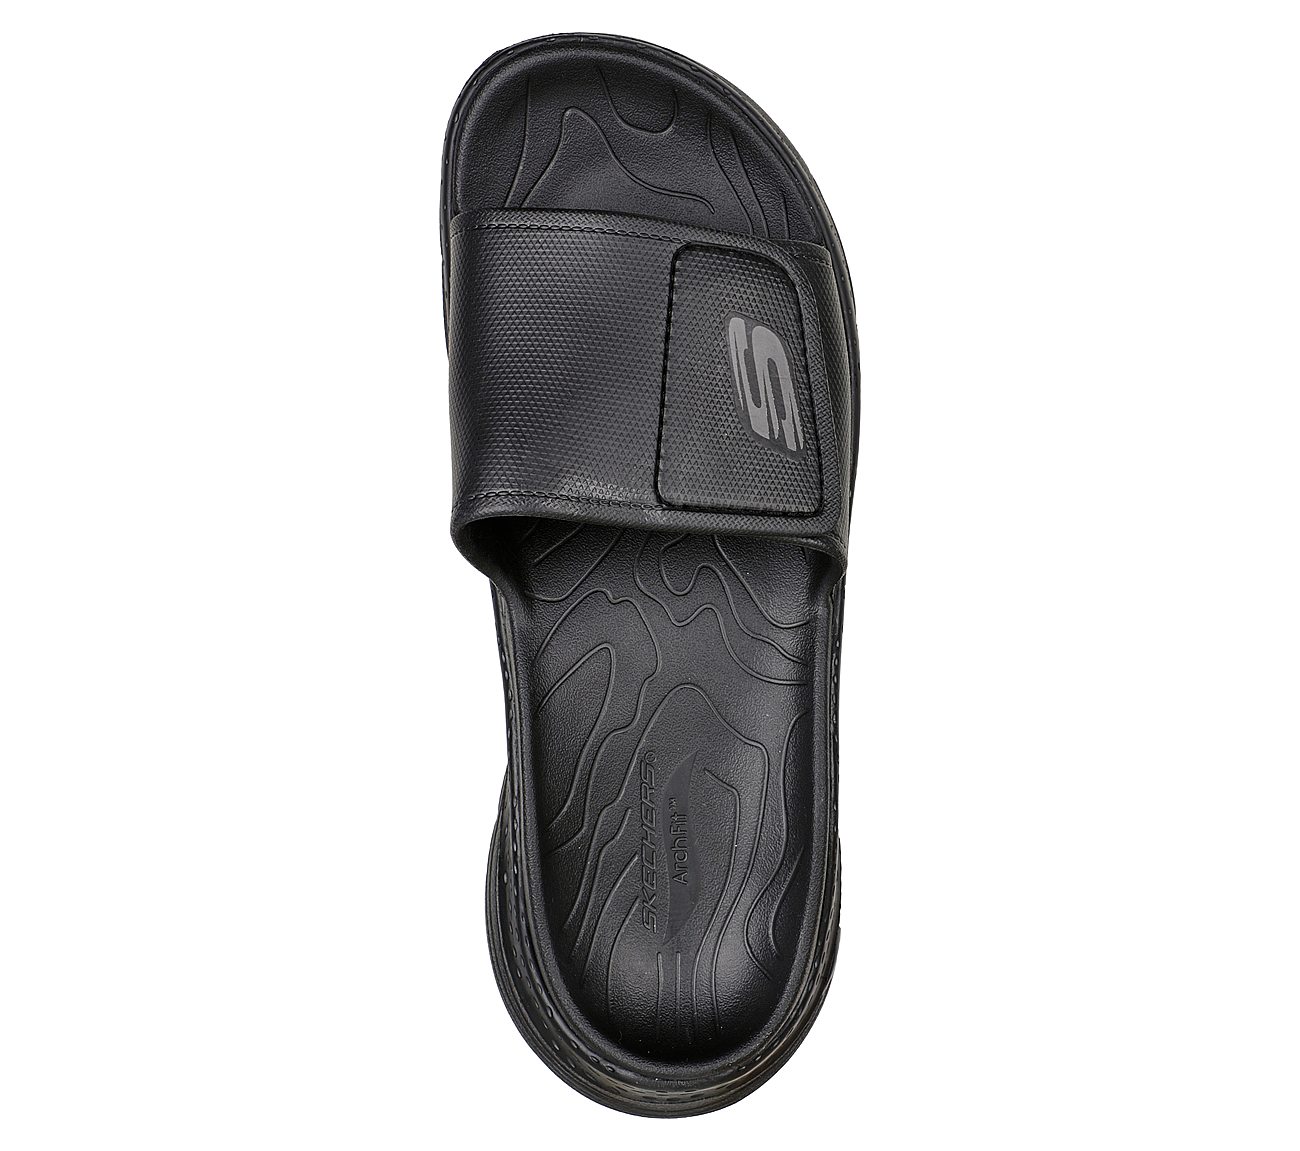 ARCH FIT, BBLACK Footwear Top View